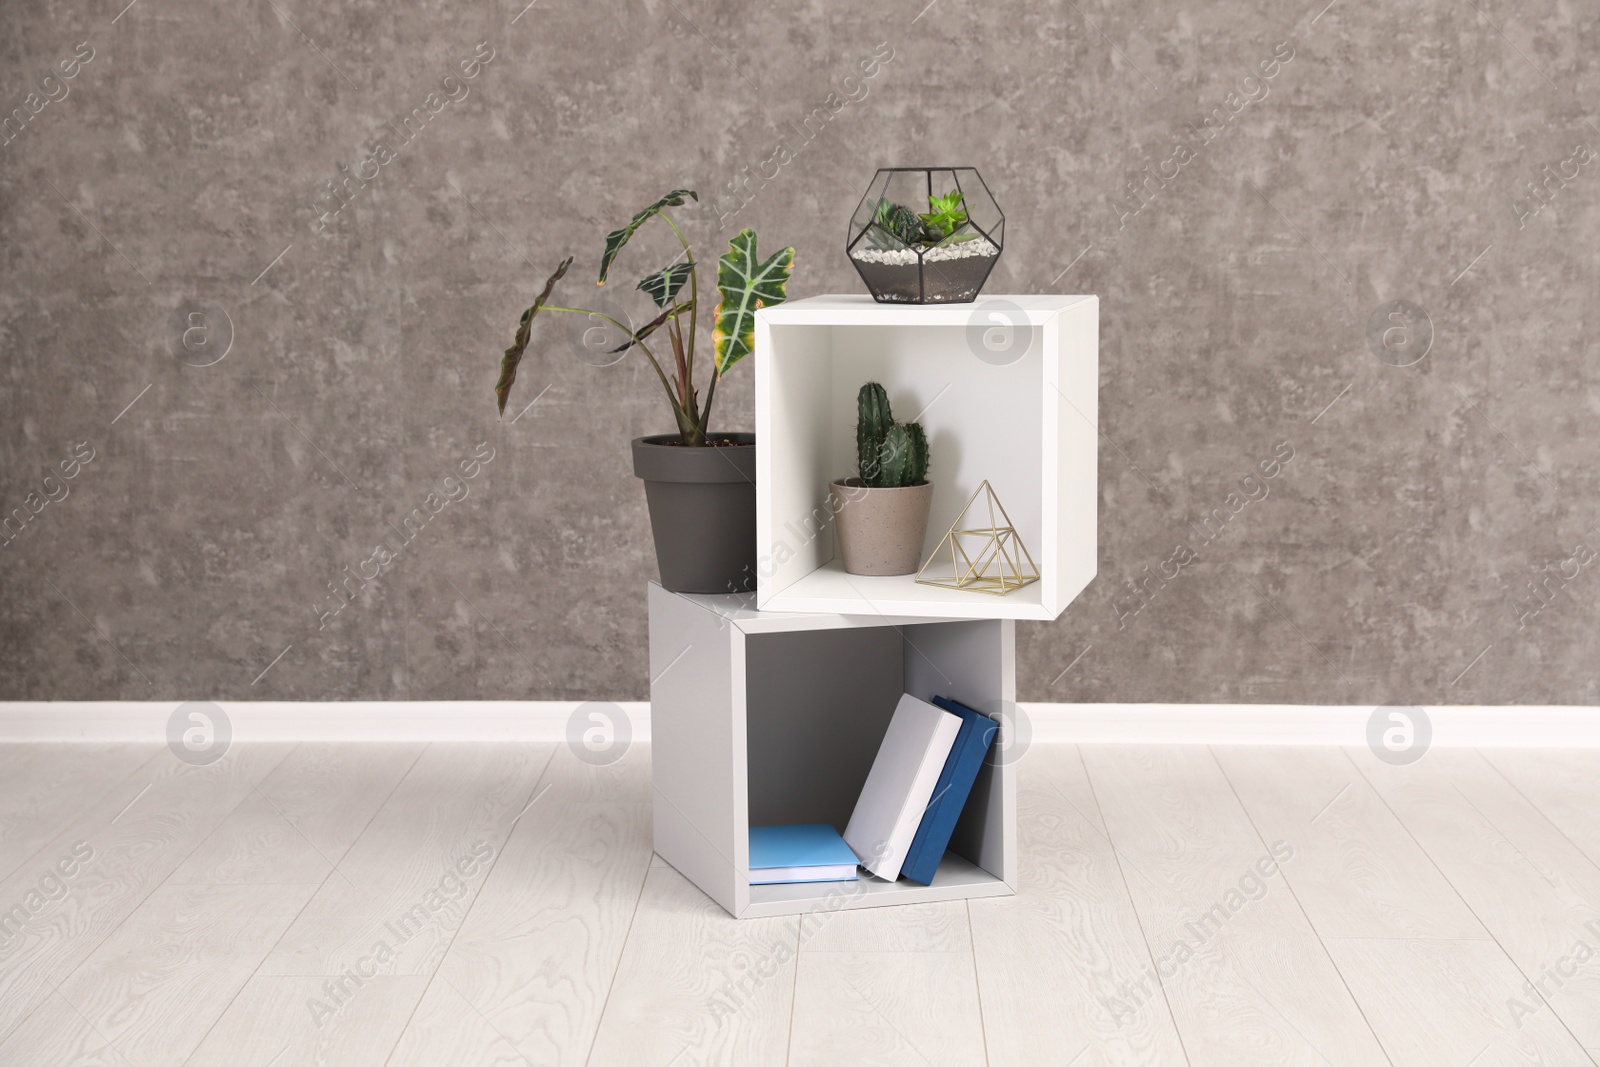 Photo of Shelving unit with indoor plants and books for interior design on floor at grey wall. Trendy home decor